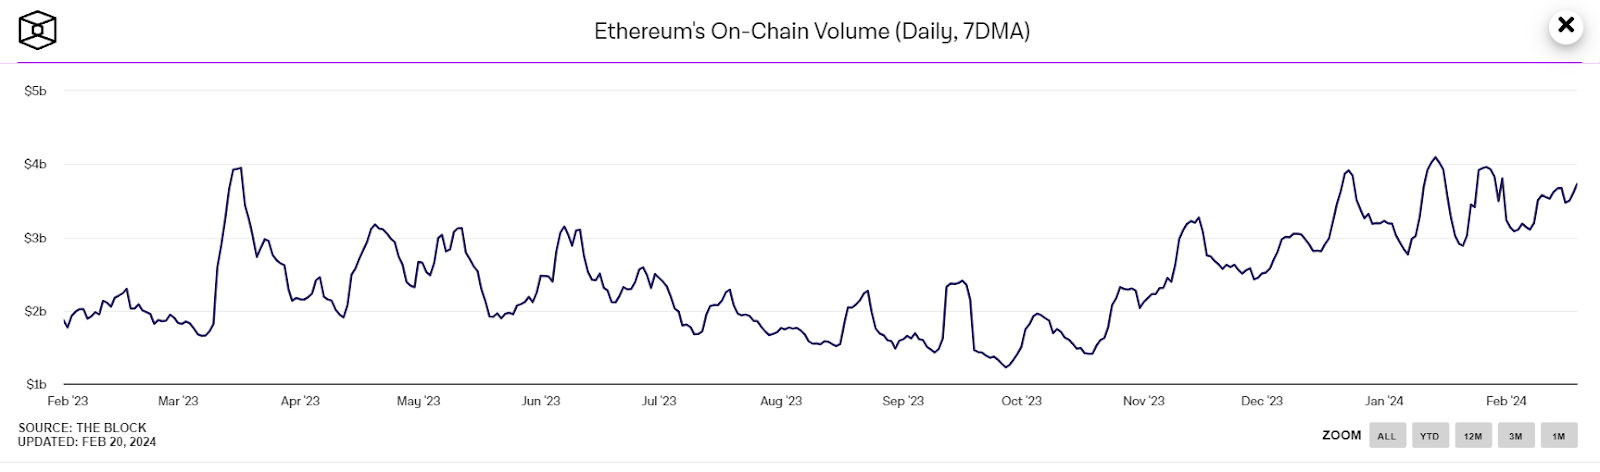 About Chain Volume Ethereum